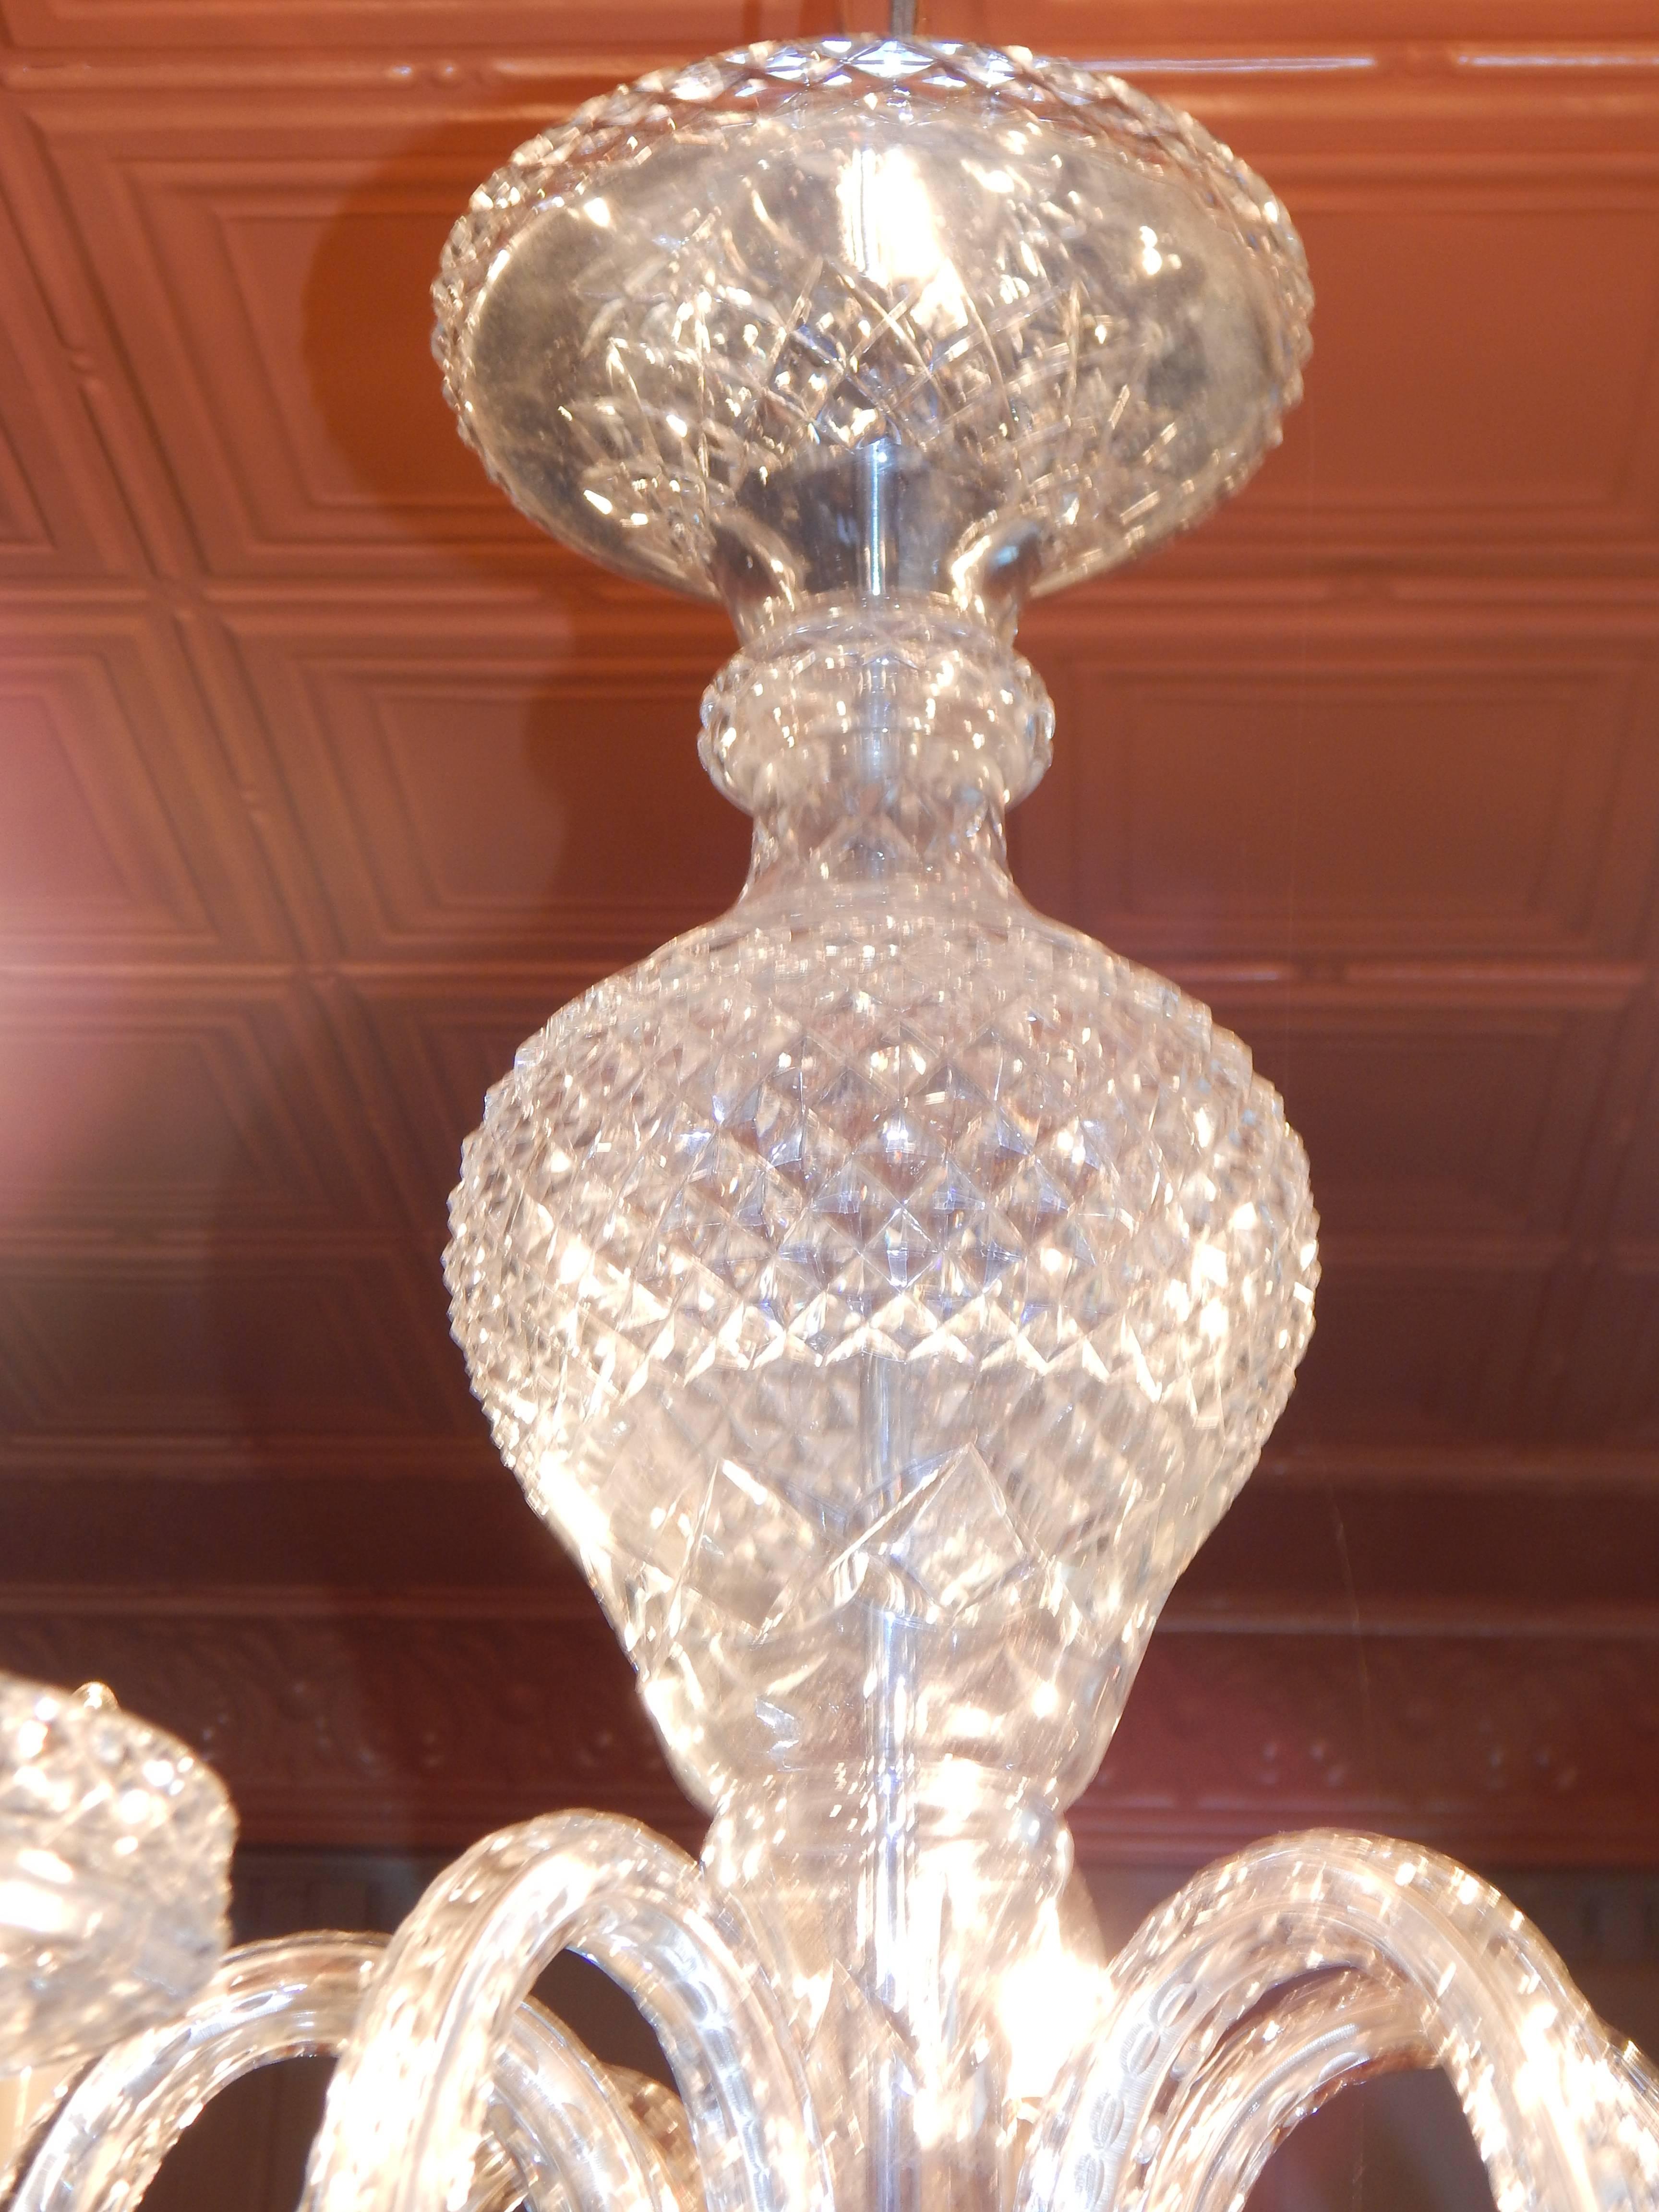 A simple, elegant Waterford style six arm chandelier.